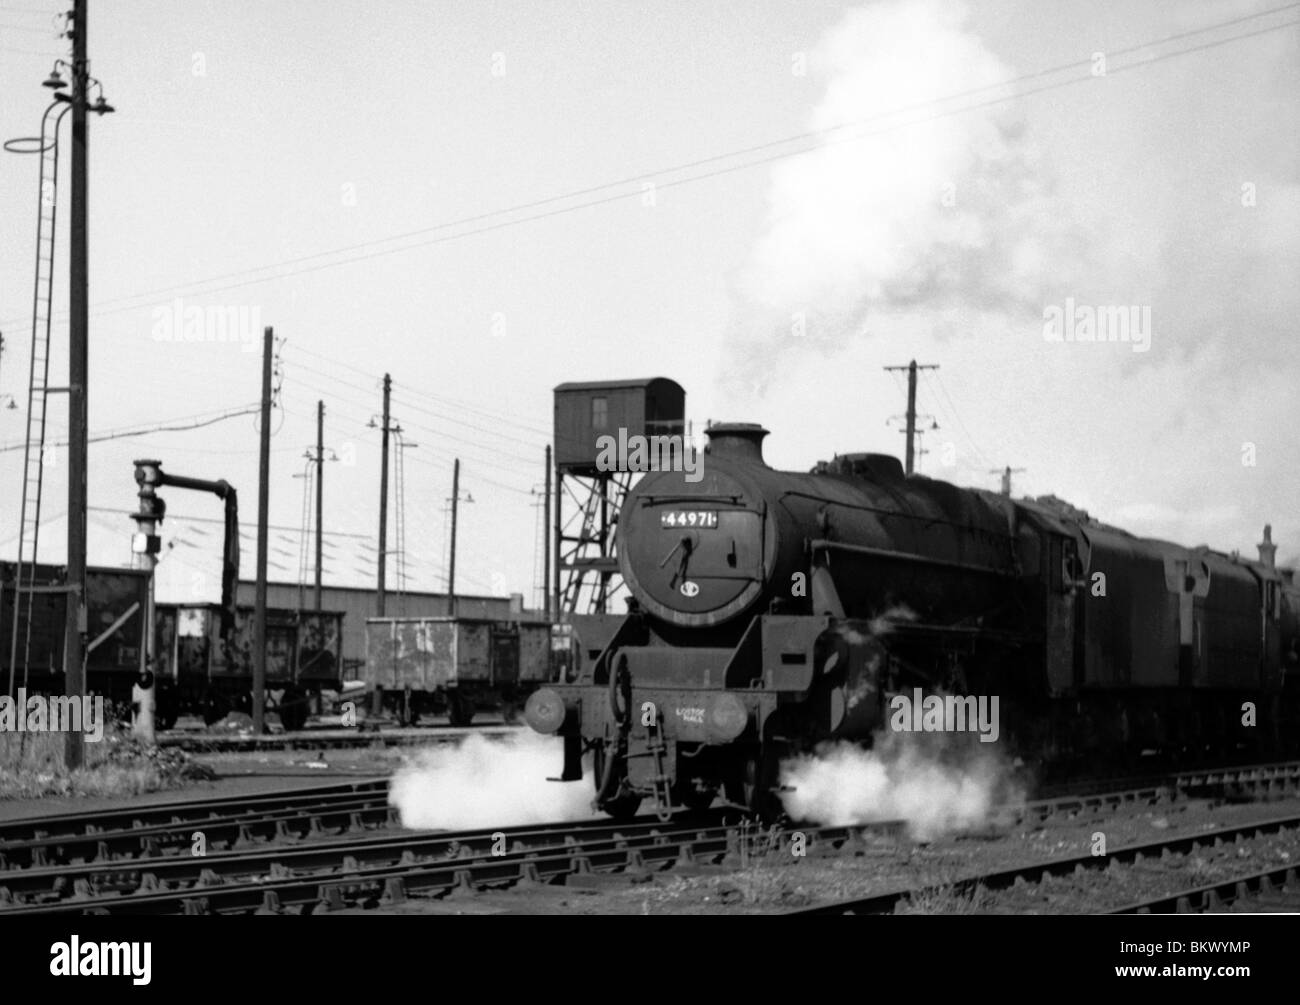 engine number 44971 black 5 class steams away from a depot during the last days of steam on british rail Stock Photo